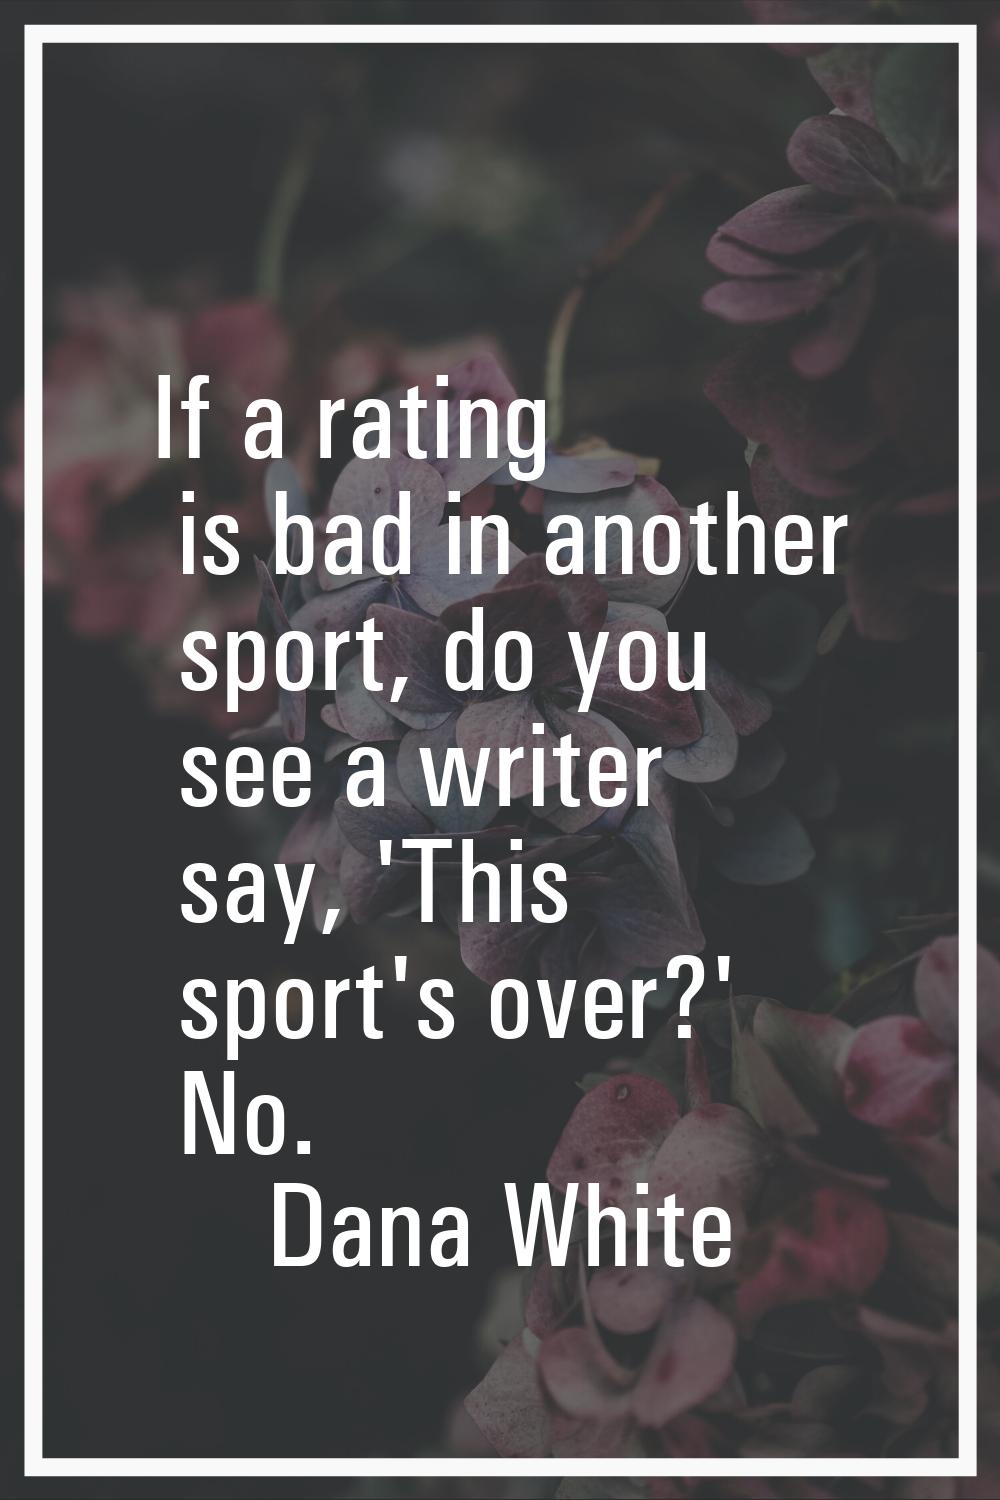 If a rating is bad in another sport, do you see a writer say, 'This sport's over?' No.